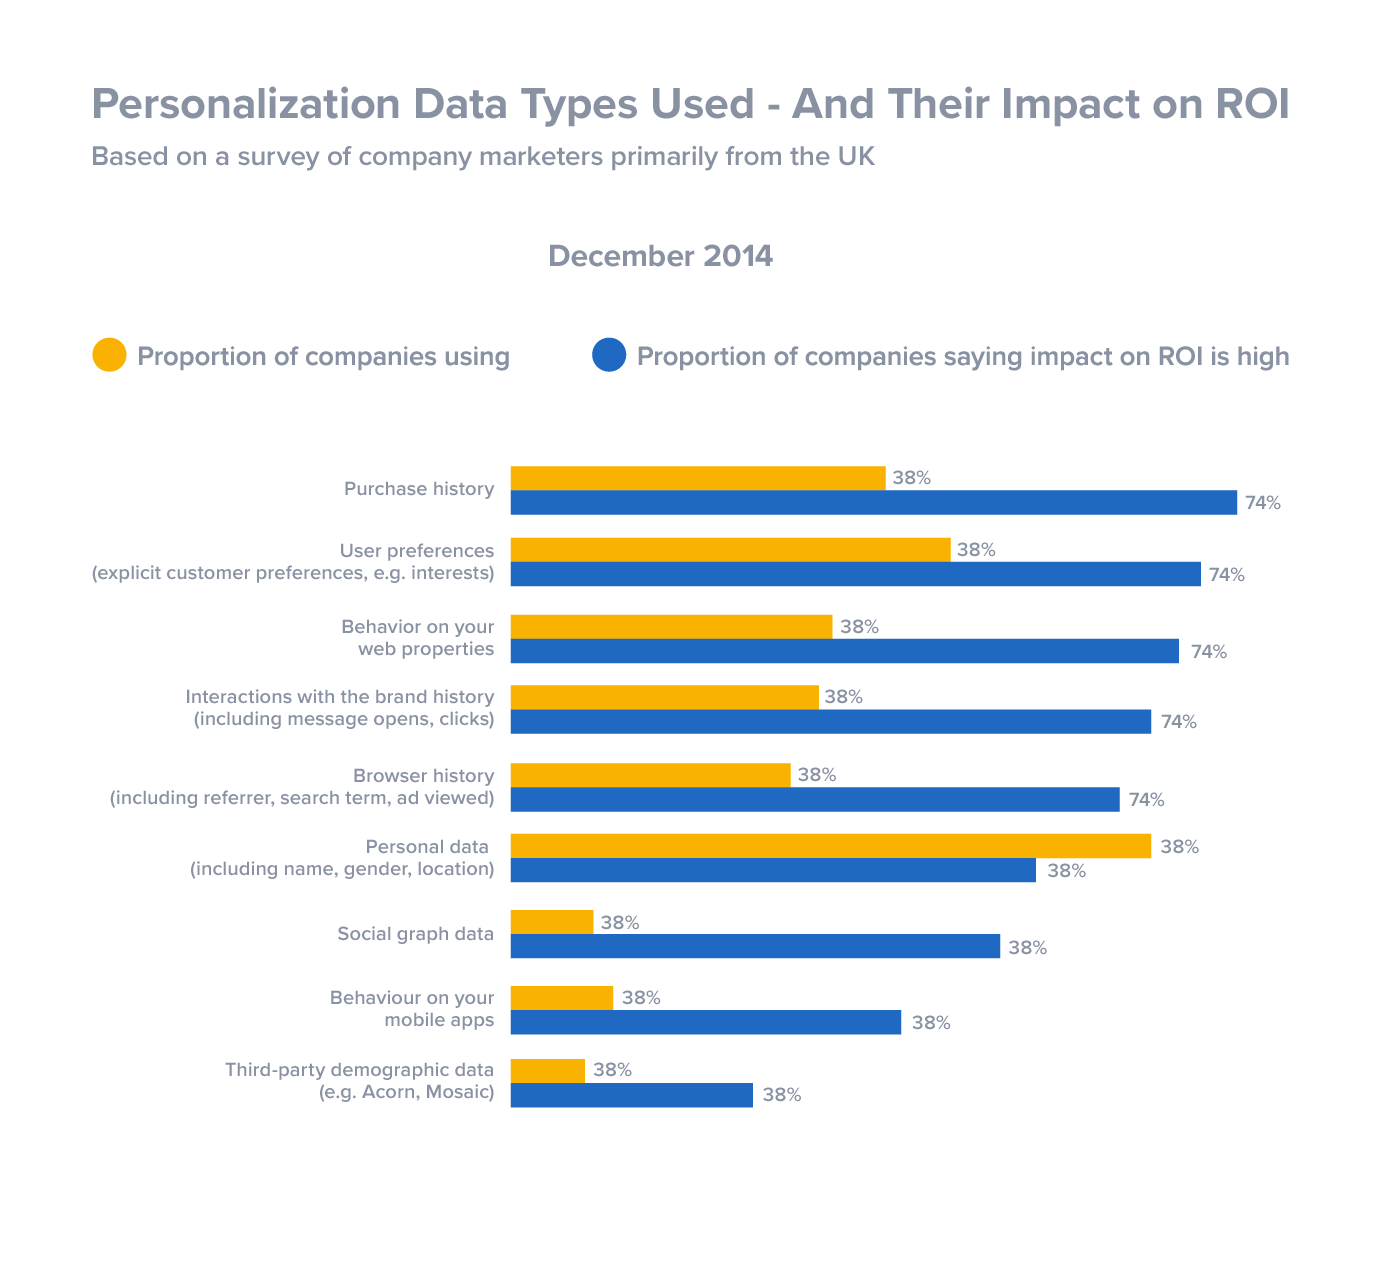 Personalization and high impact ROI